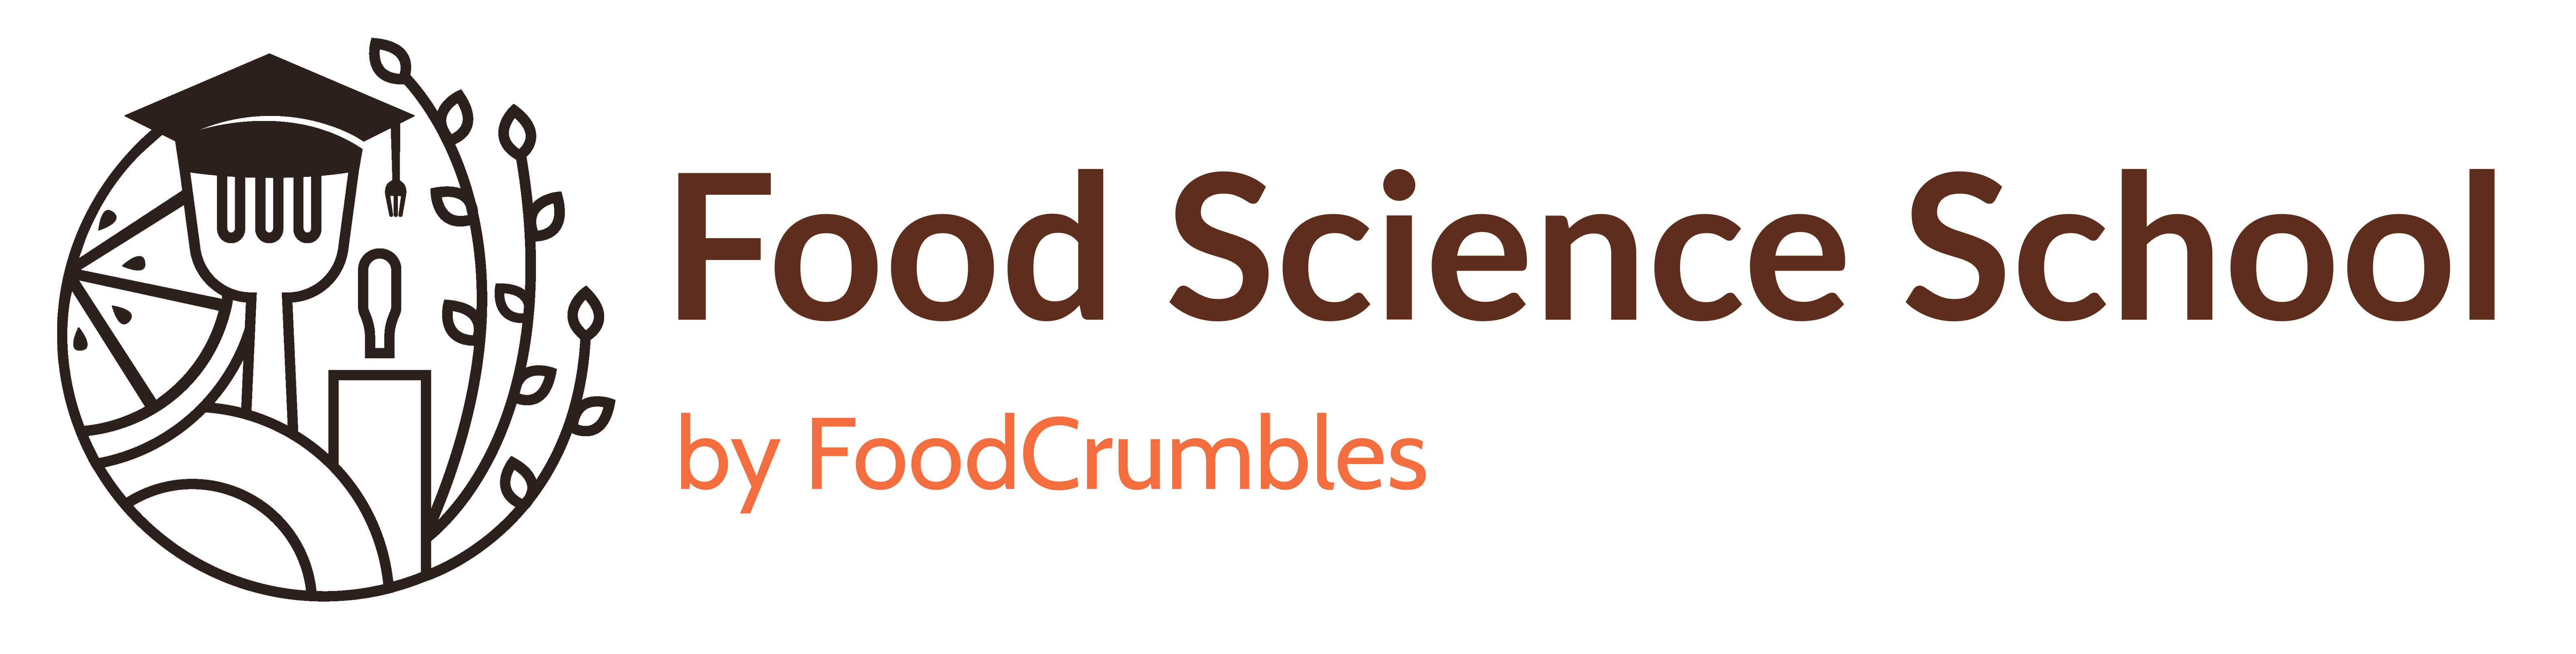 What is Food Science? - FoodCrumbles